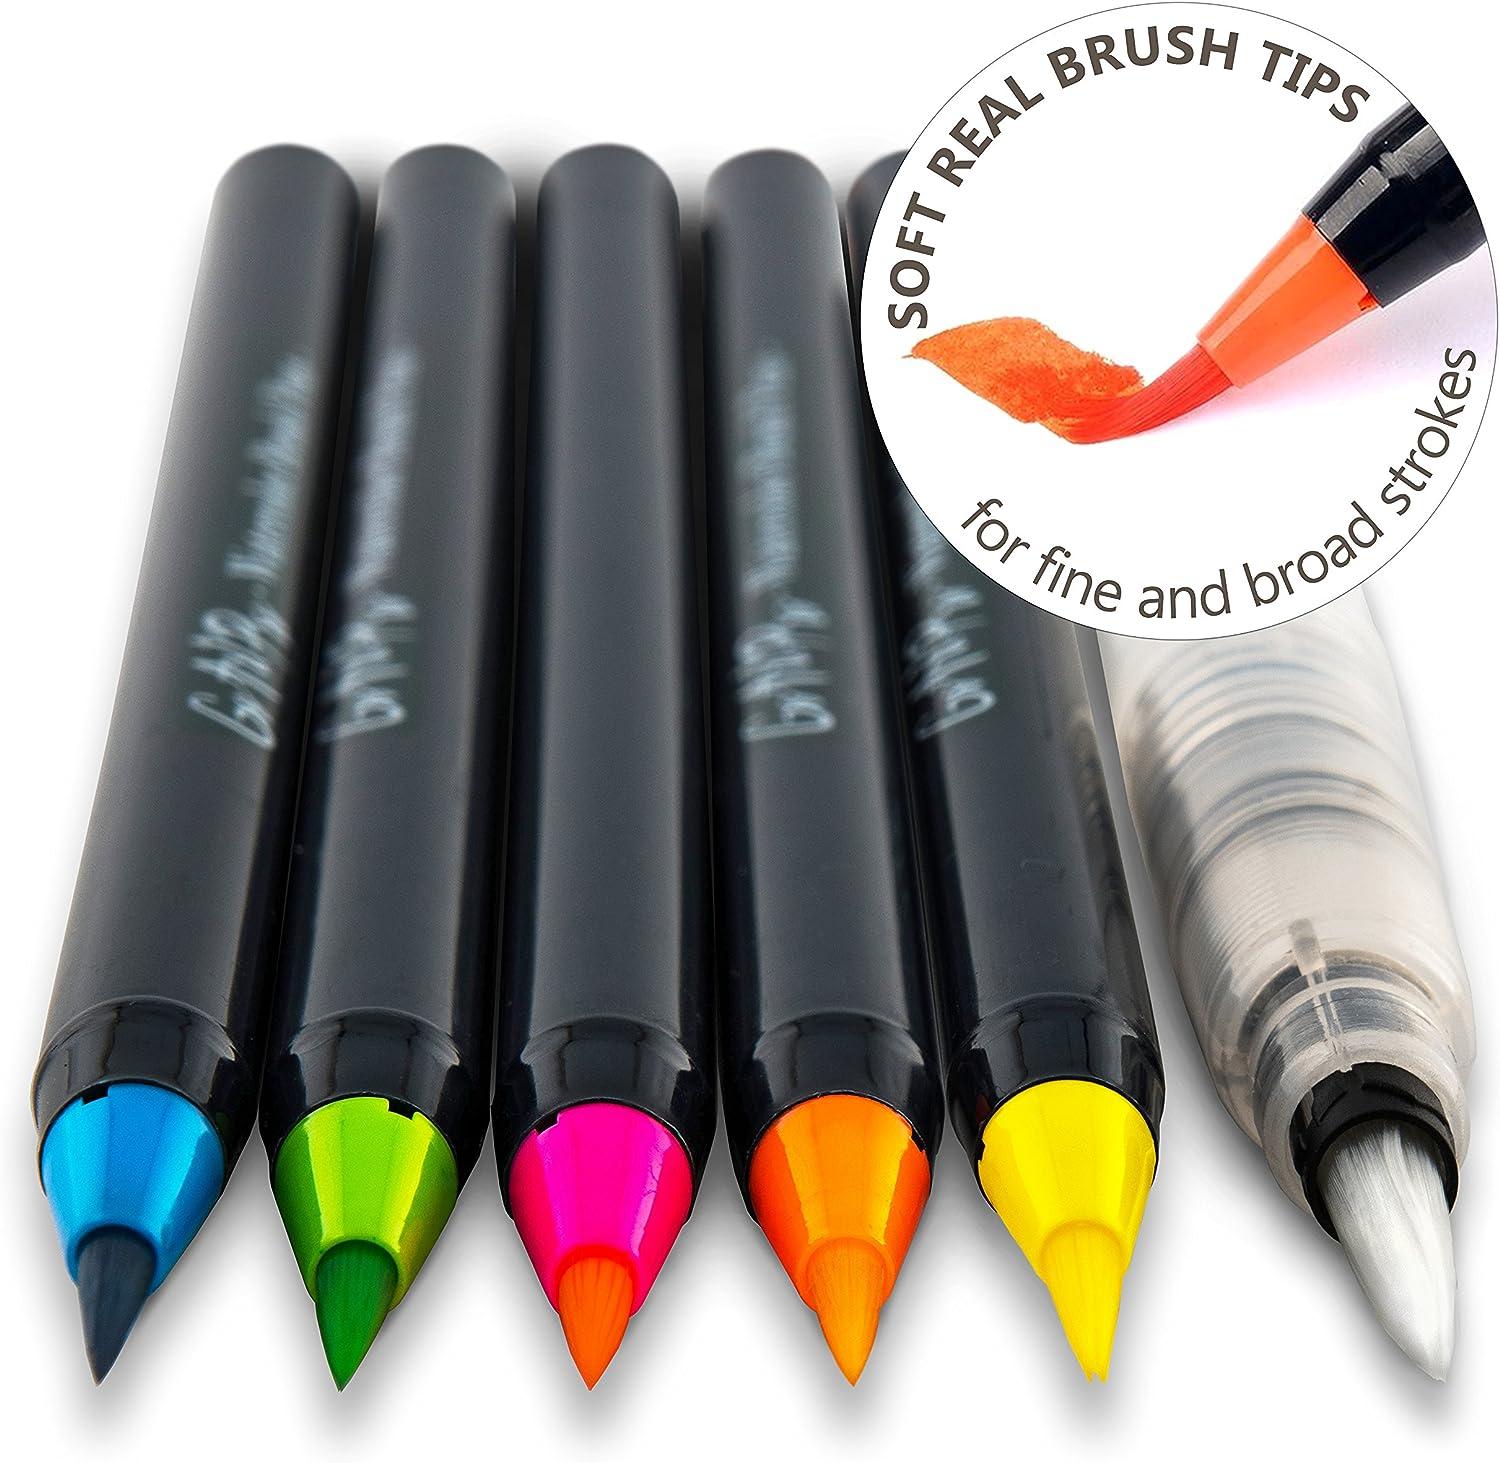 Stationery Paint Brush Pens, Painting with Flexible Nylon Brush Tips, Paint  Markers for Coloring, Calligraphy and Drawing Pen - China Pen, Brush Pen